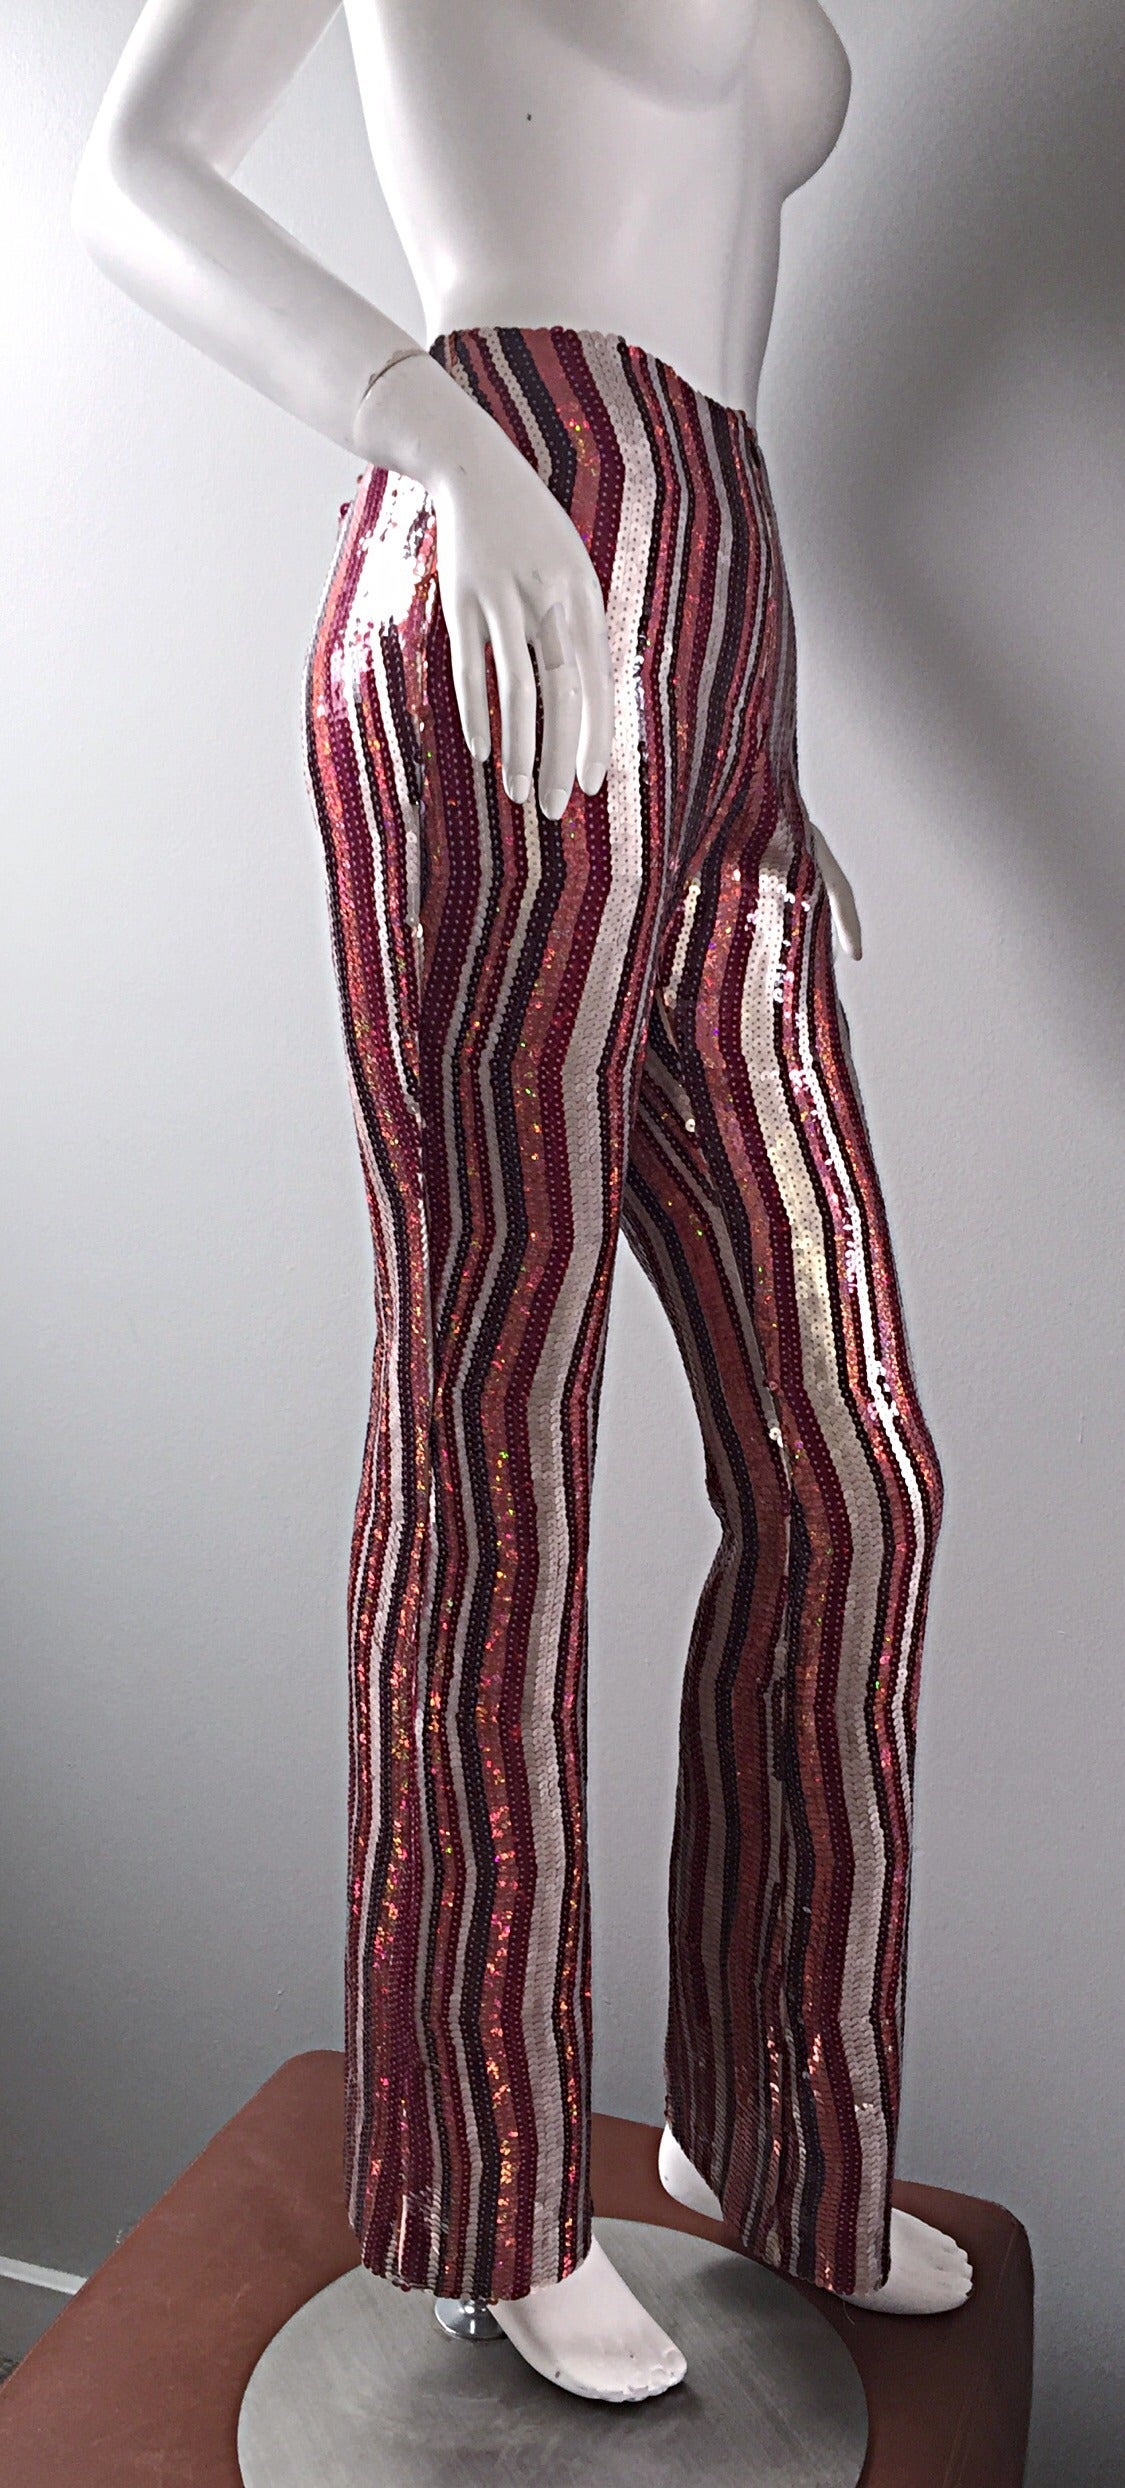 Absolutely AMAZING brand new (with original tags) Regina Rubens all-over sequin pants, with flared legs! Retailed for $1,595, in Paris, in the early 90s, which is equivalent to nearly $3,000 today! Made in France, these beauties feature zig-zag